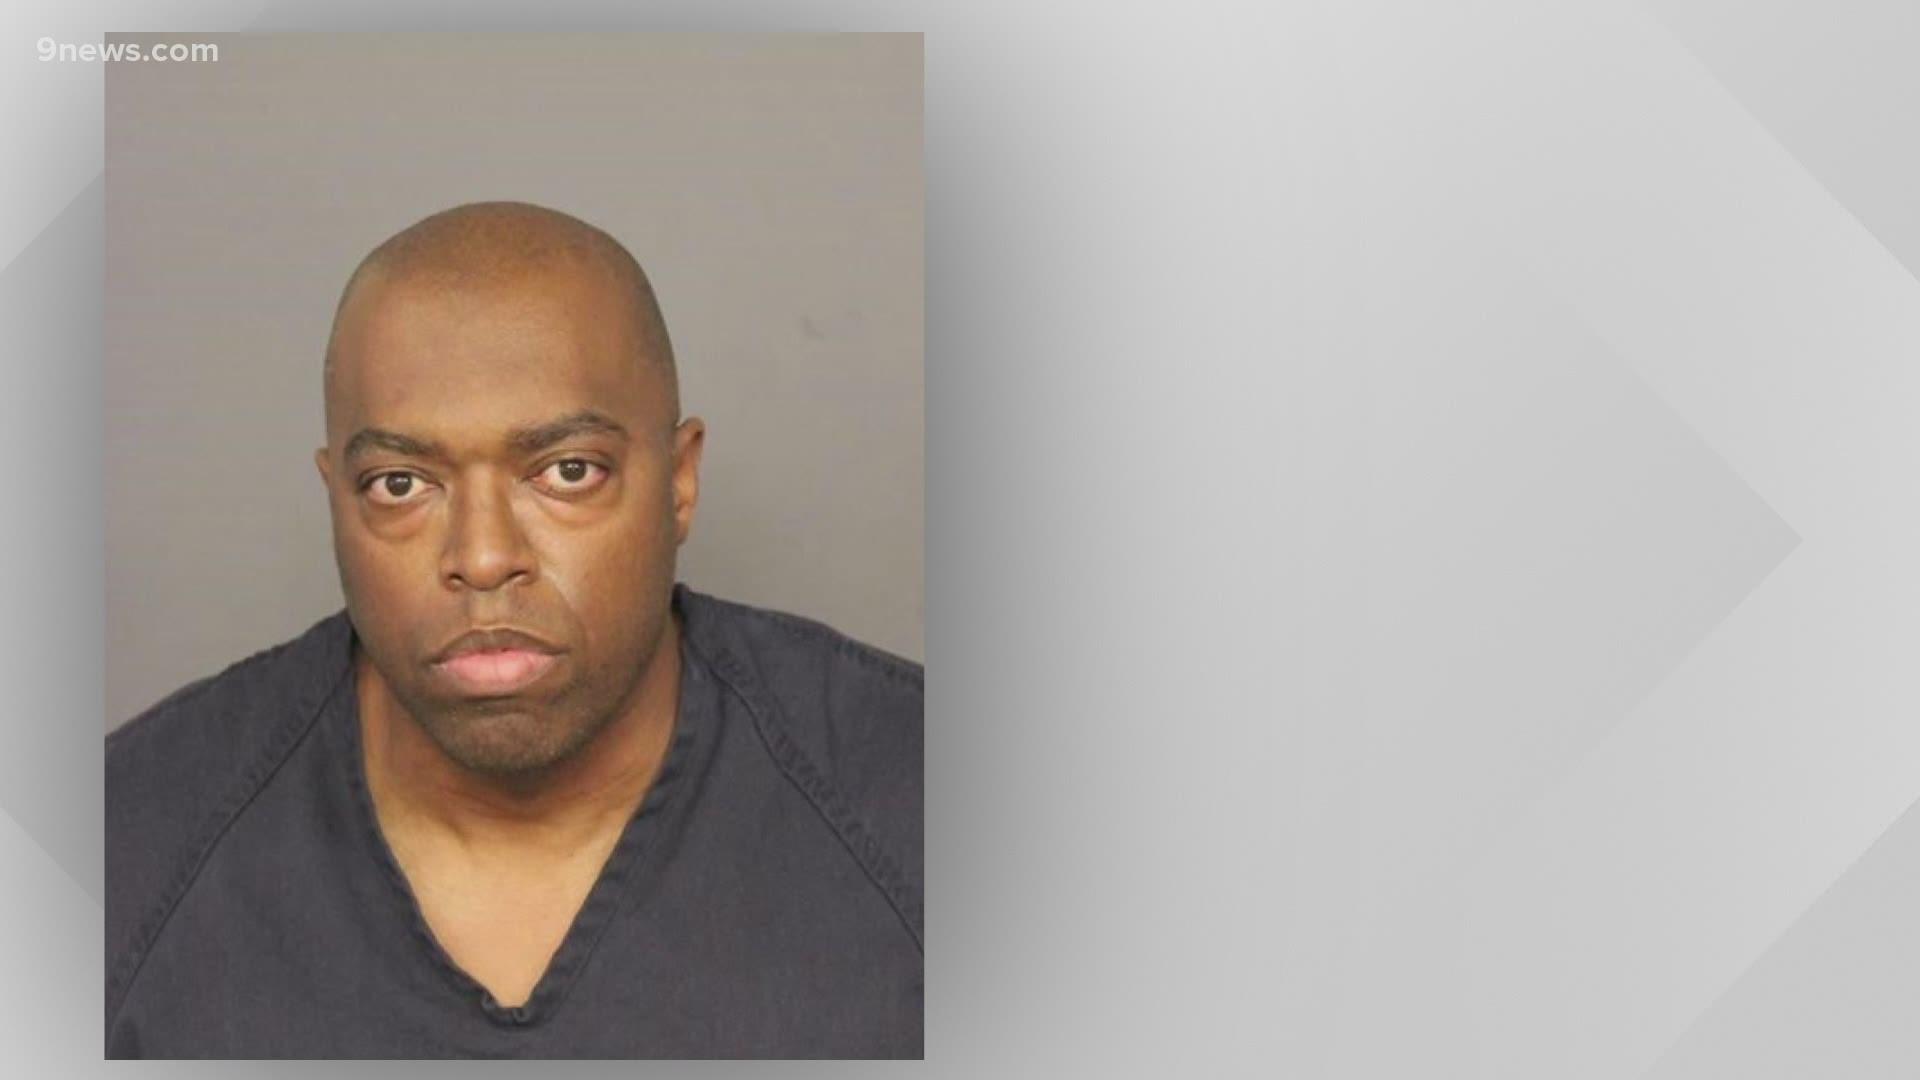 An officer for the Hudson Police Department was cleared for an off-duty incident last year. Now he's charged in another shooting.